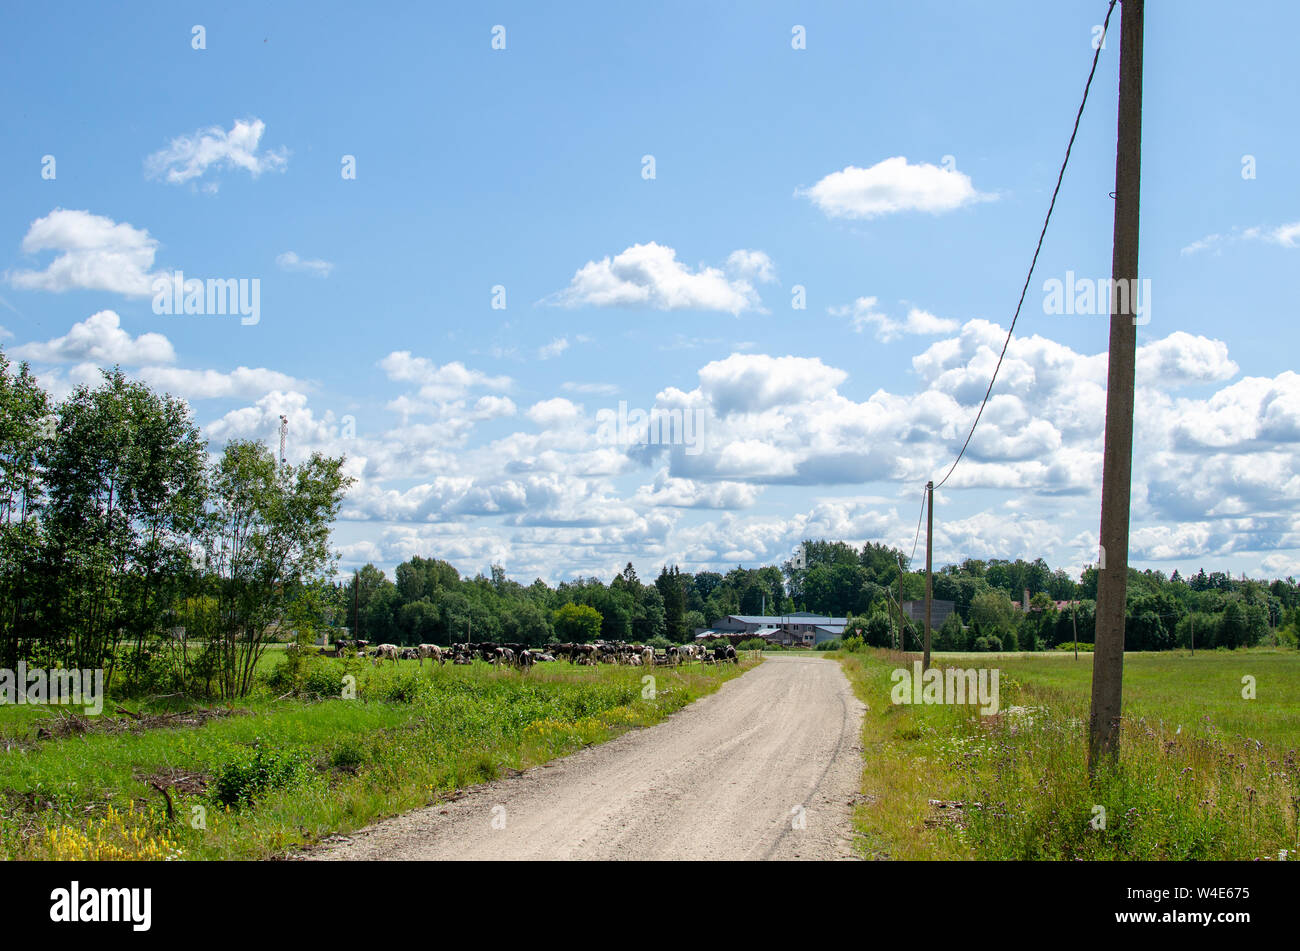 A countryside road in with views of cows and agricultural fields in Jarvamaa, Estonia Stock Photo